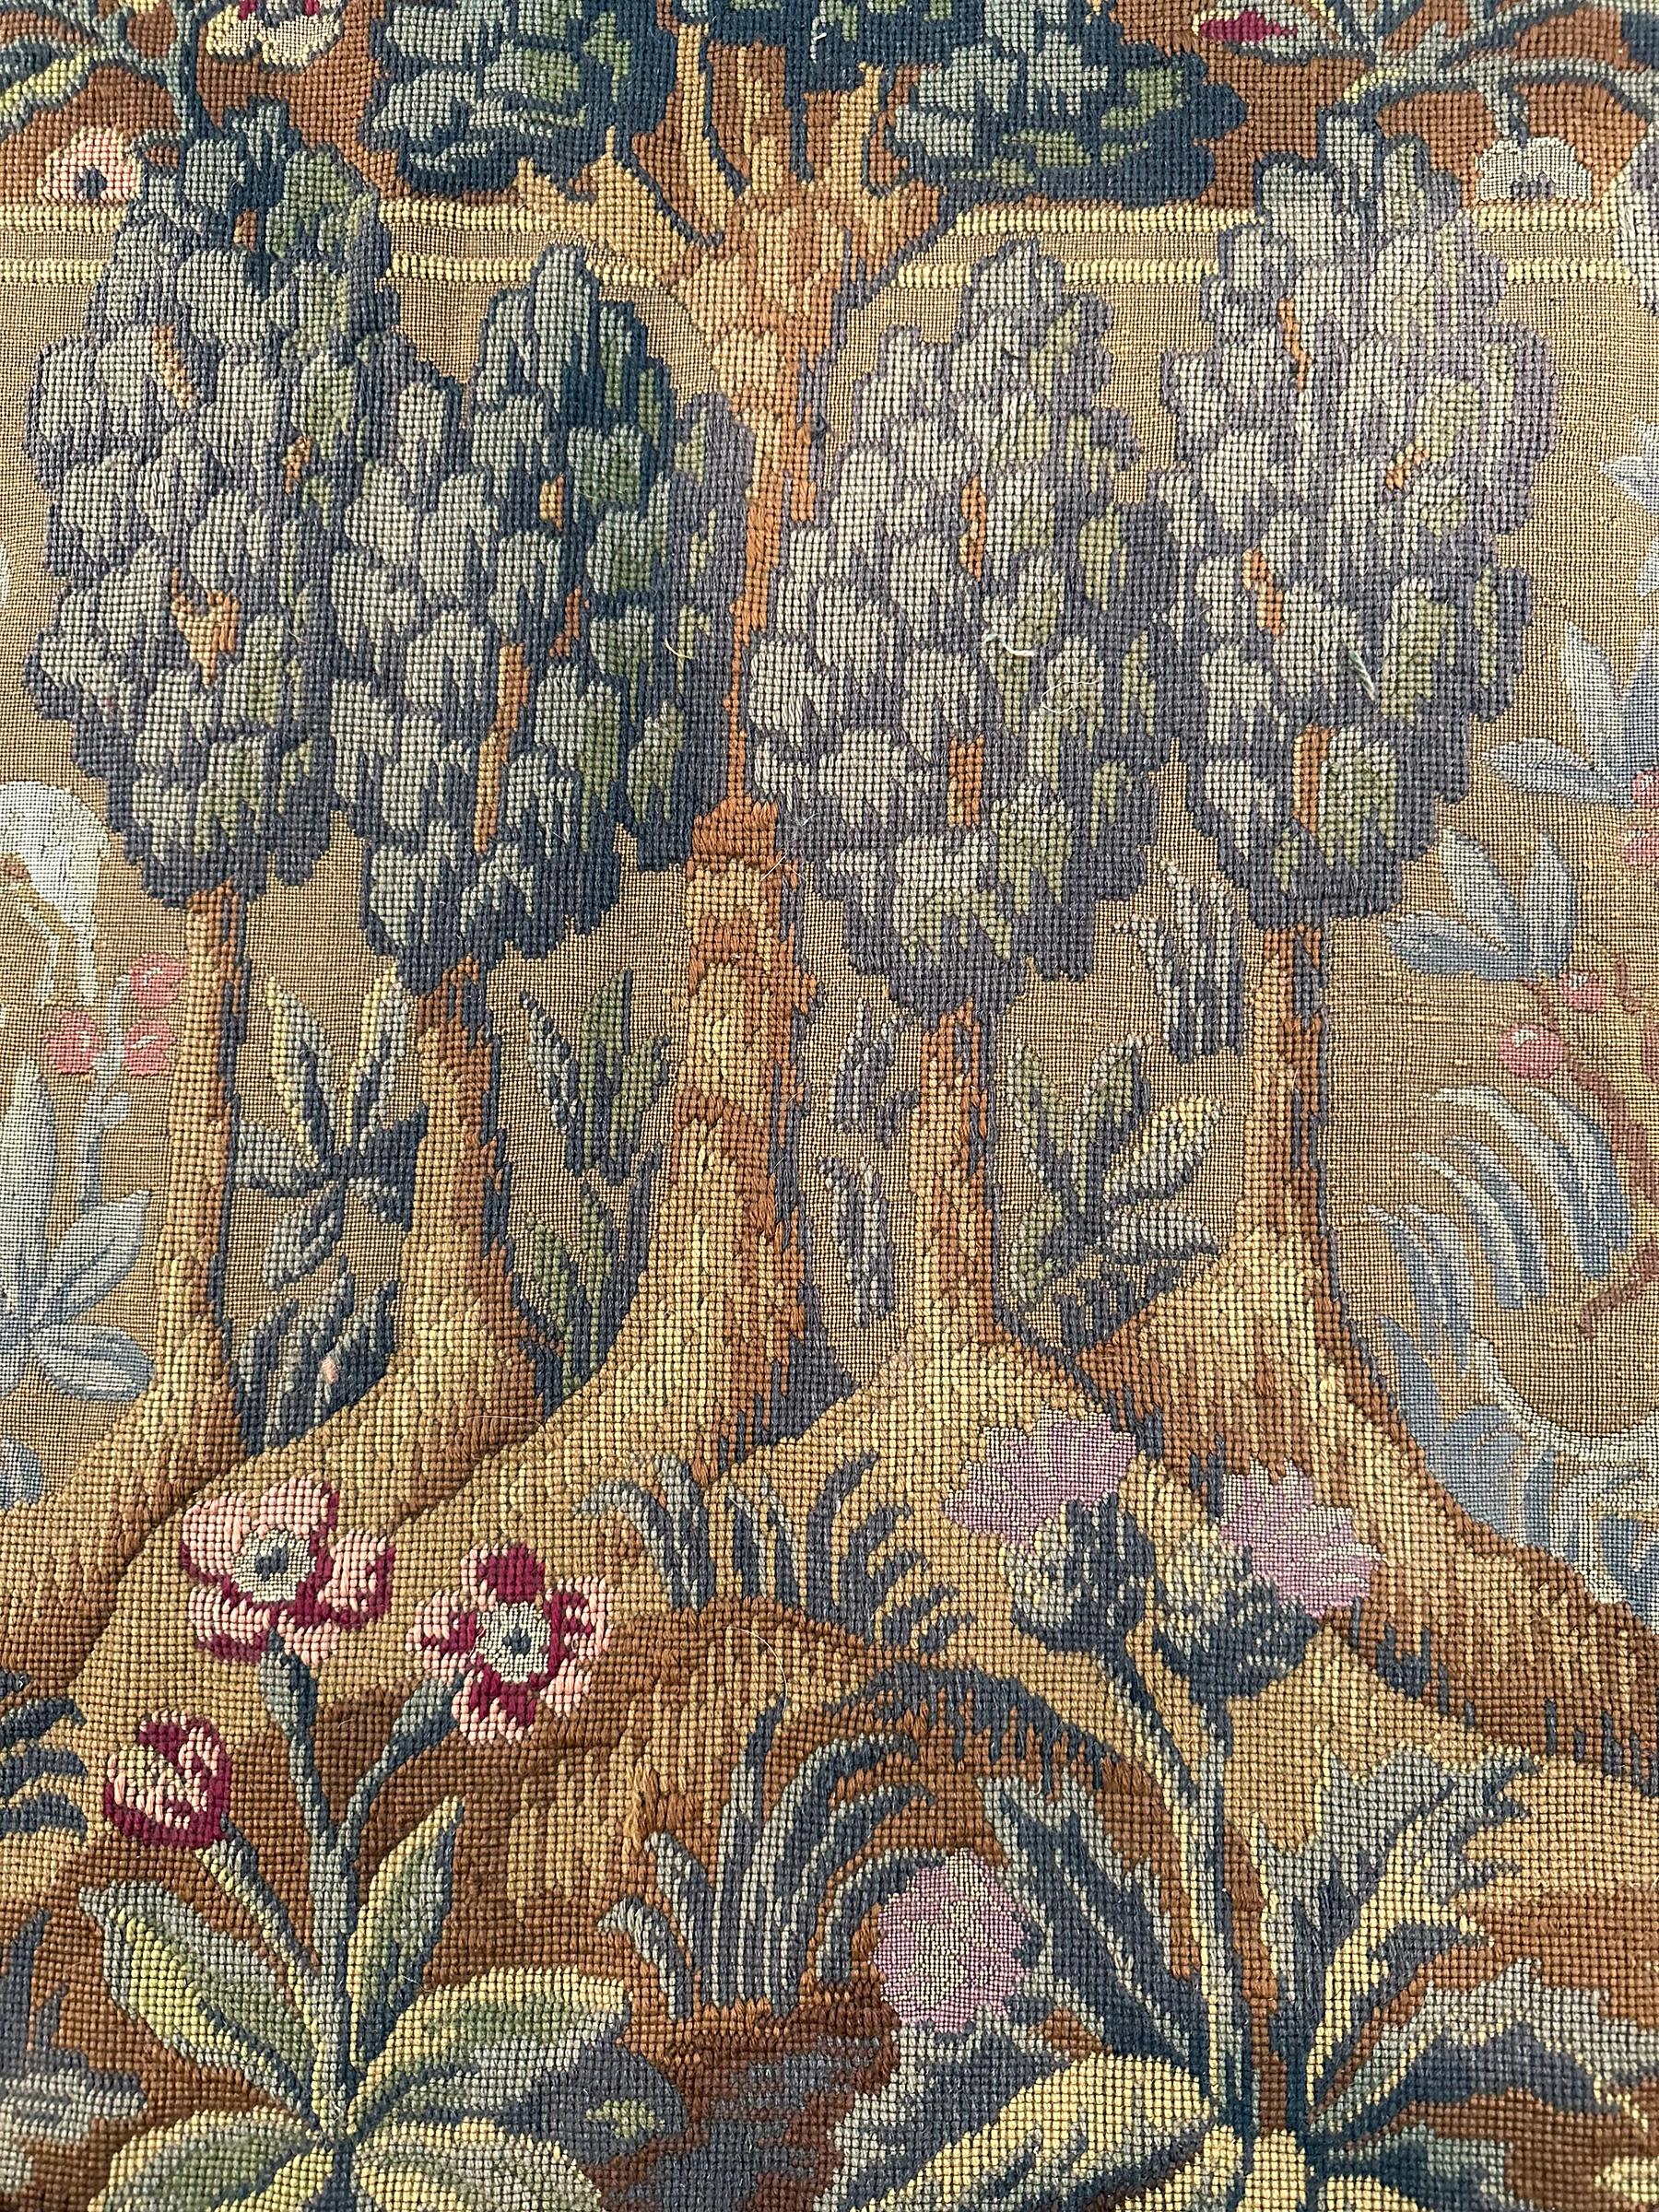 Early 20th Century 1920 Antique English Needlepoint Tapestry Wool & Silk 3x5 82cm x 158cm For Sale